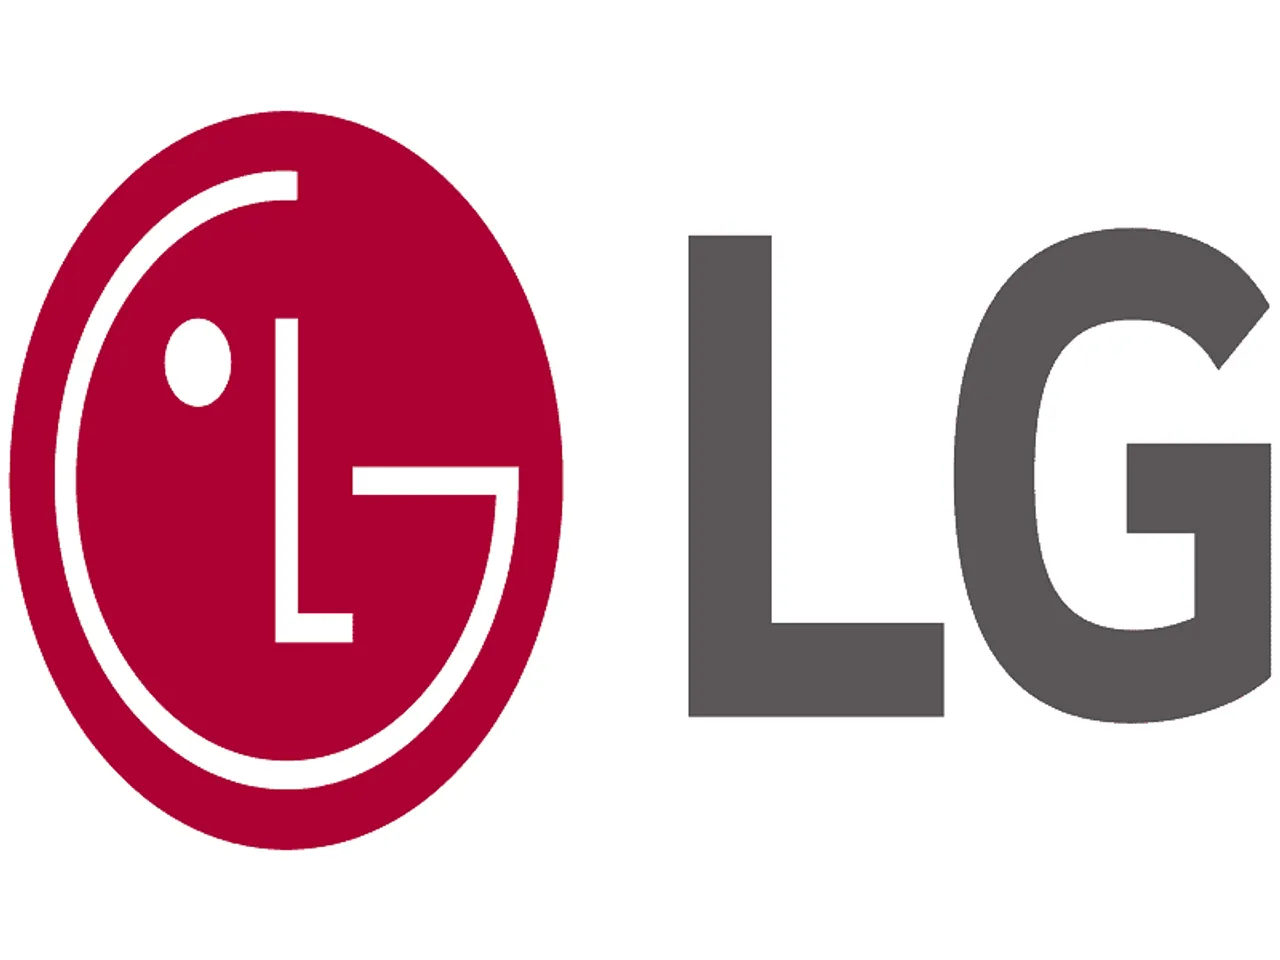 LG Shutting Down Smartphone Business: Was it Long Time Coming?